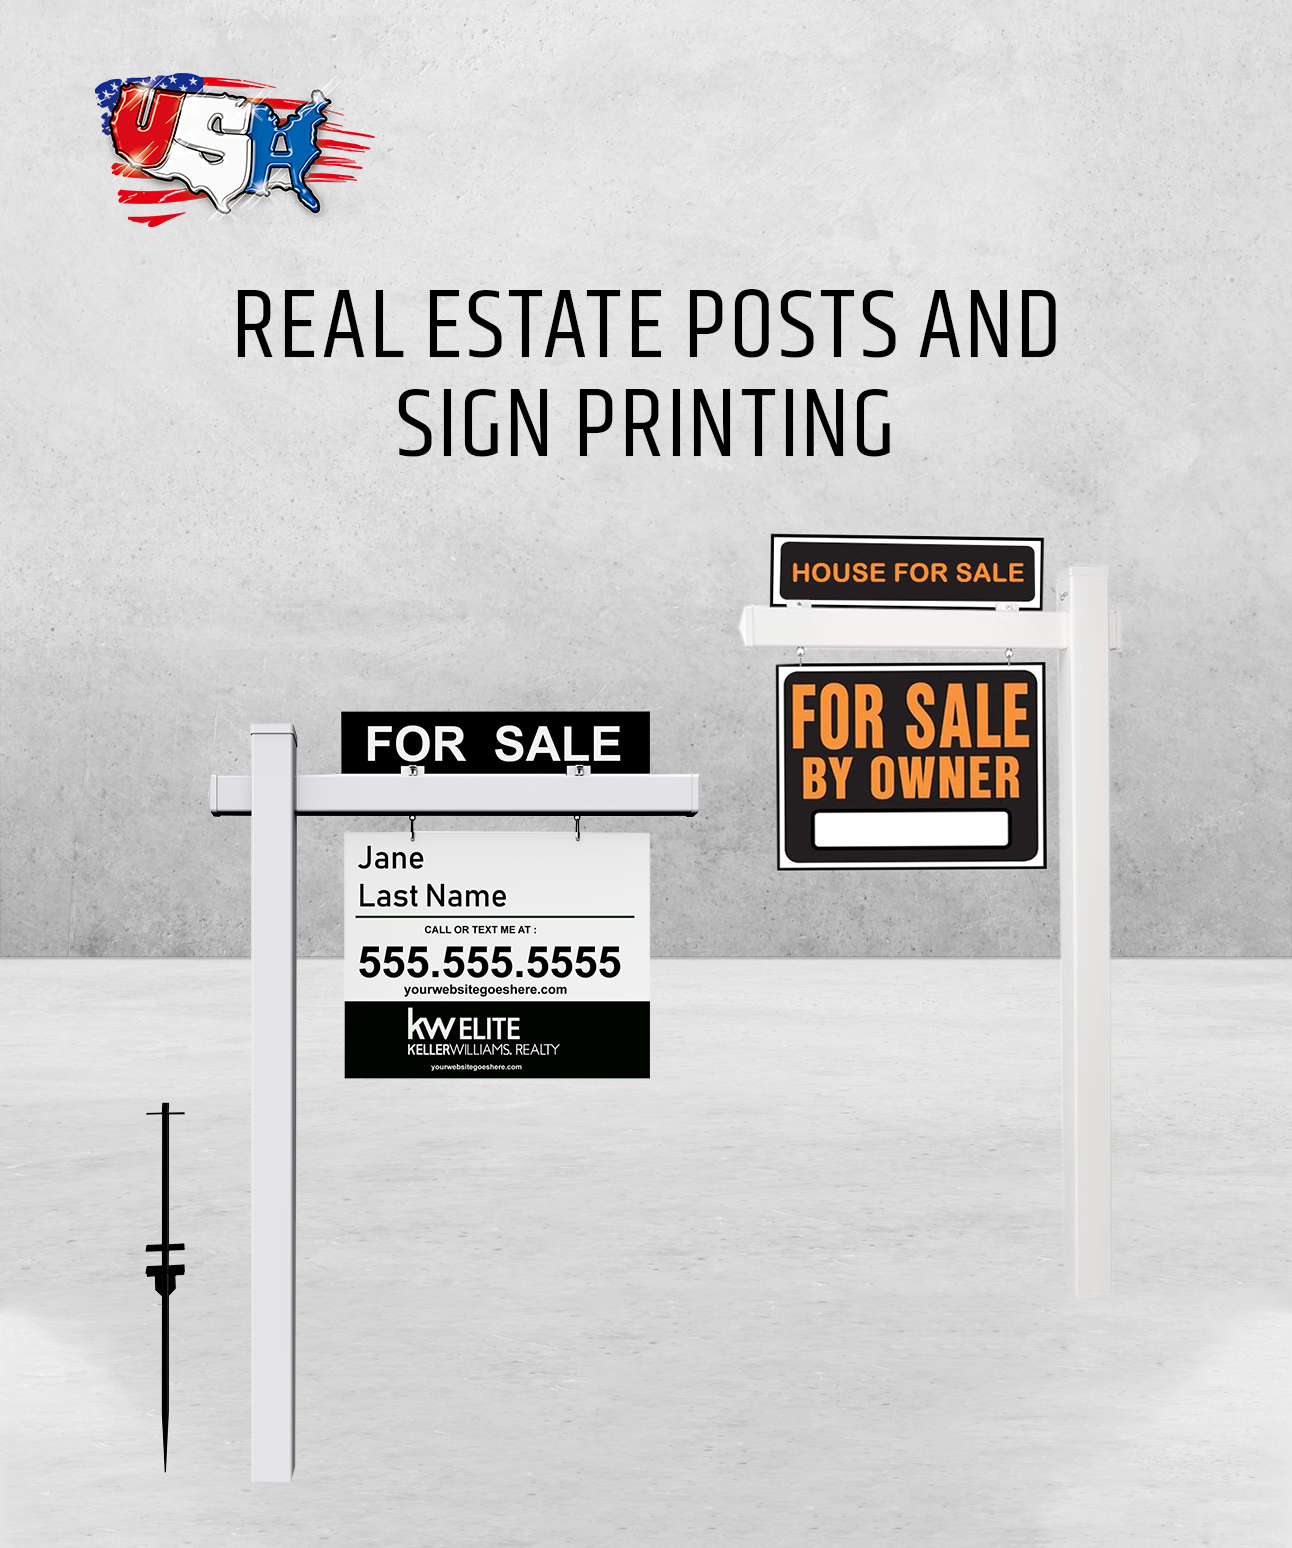 Real Estate posts and Sign Printing